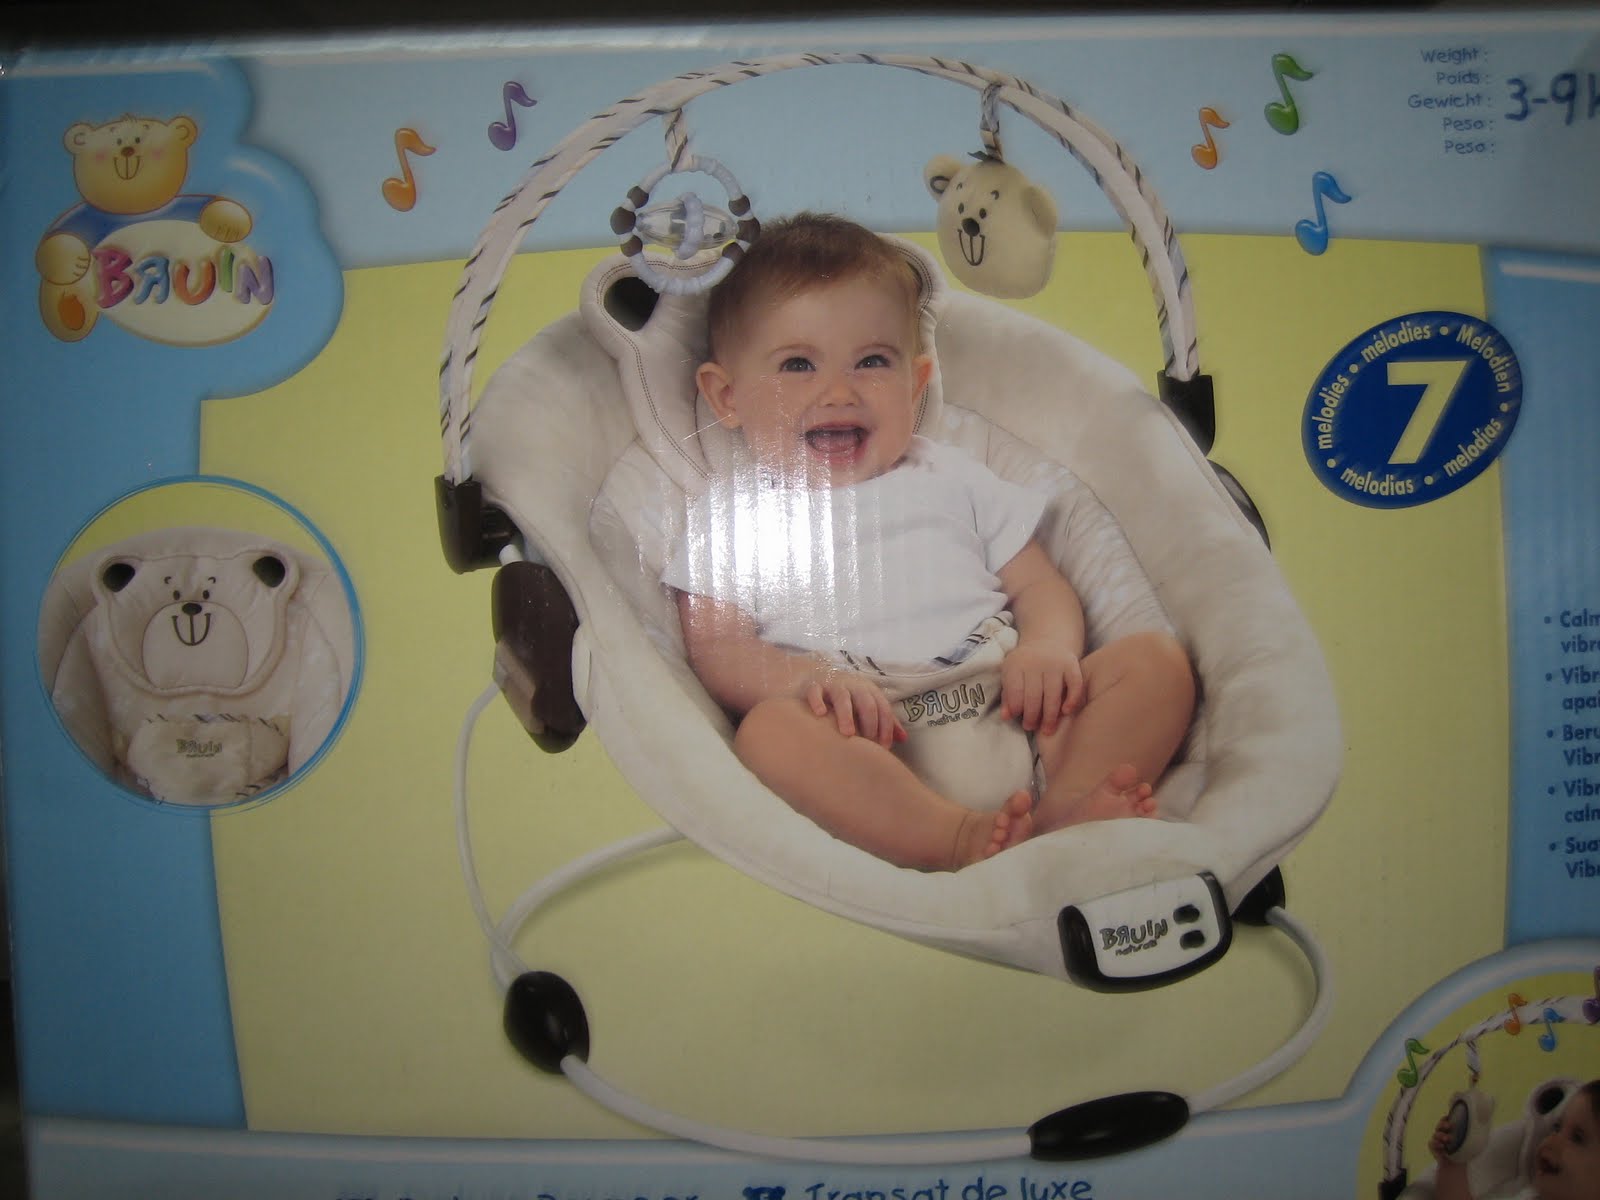 Tokomagenta: A Showcase of Products: Baby Bouncer BRUIN 7 